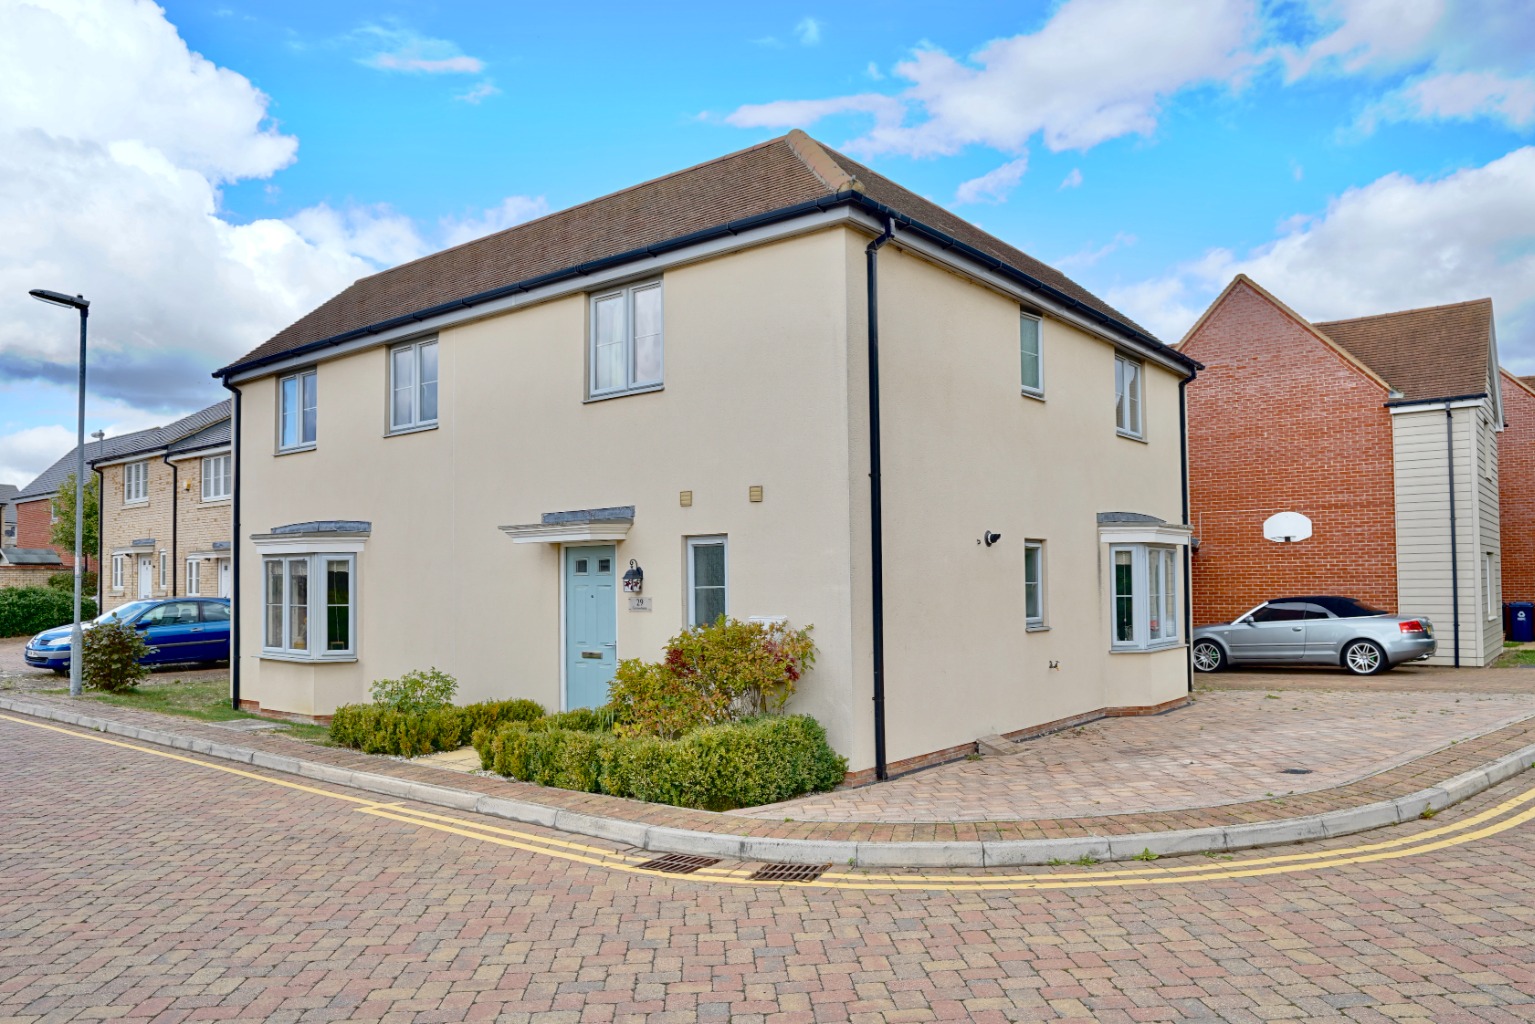 4 bed detached house for sale in Furrowfields, St. Neots, PE19